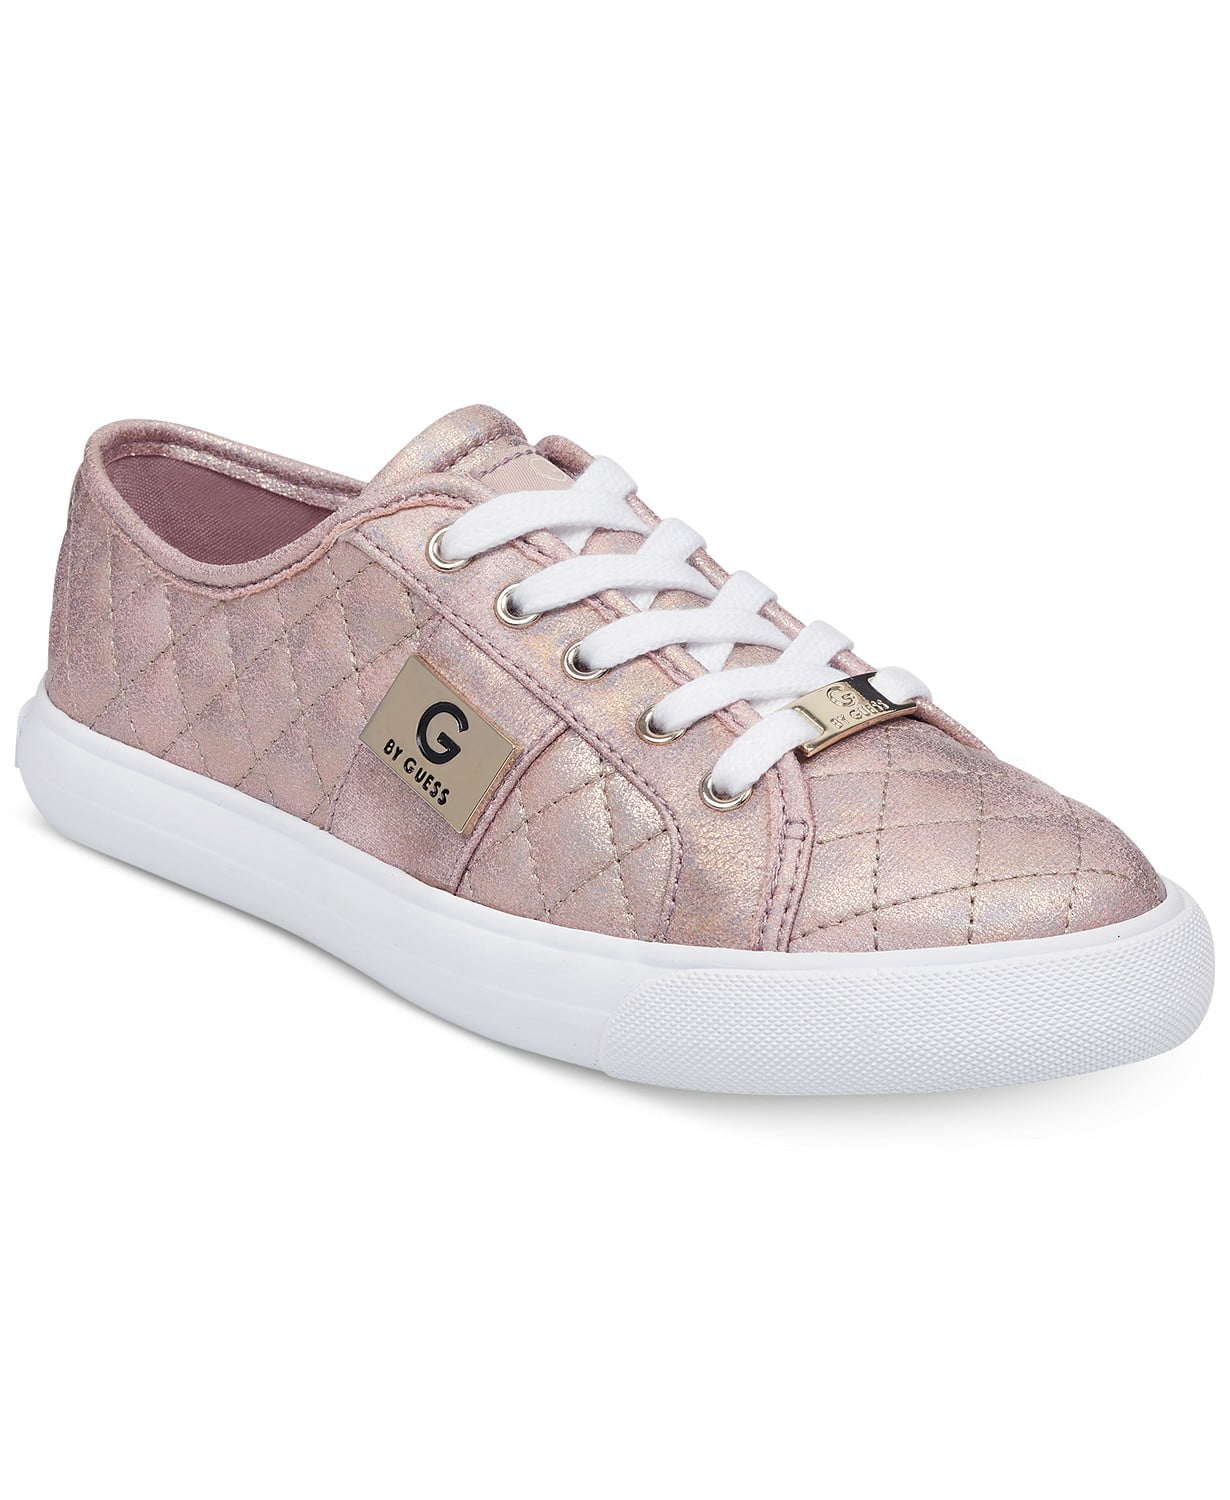 sagging forklædt Repræsentere G by Guess Women's Backer2 Lace Up Leather Quilted Pattern Sneakers Shoes  Pink (8) - Walmart.com